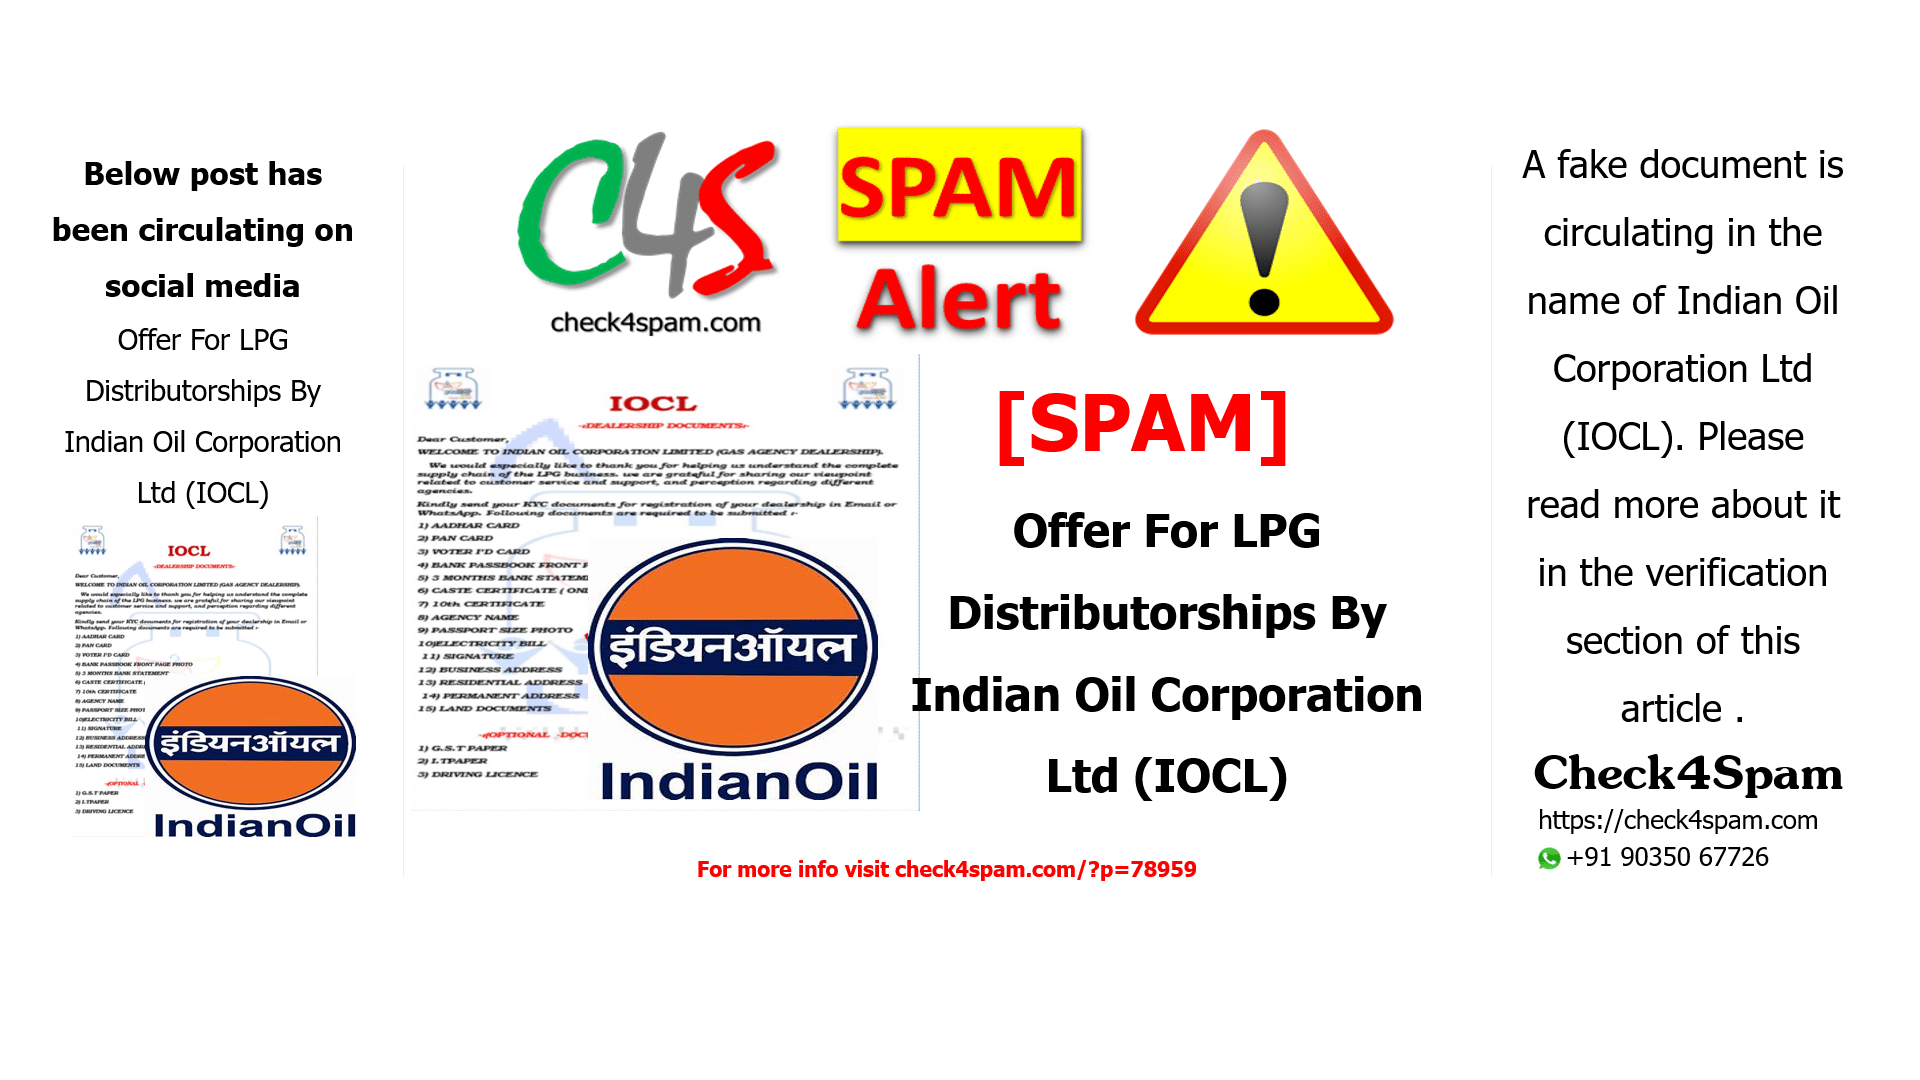 Offer For LPG Distributorships By Indian Oil Corporation Ltd (IOCL)